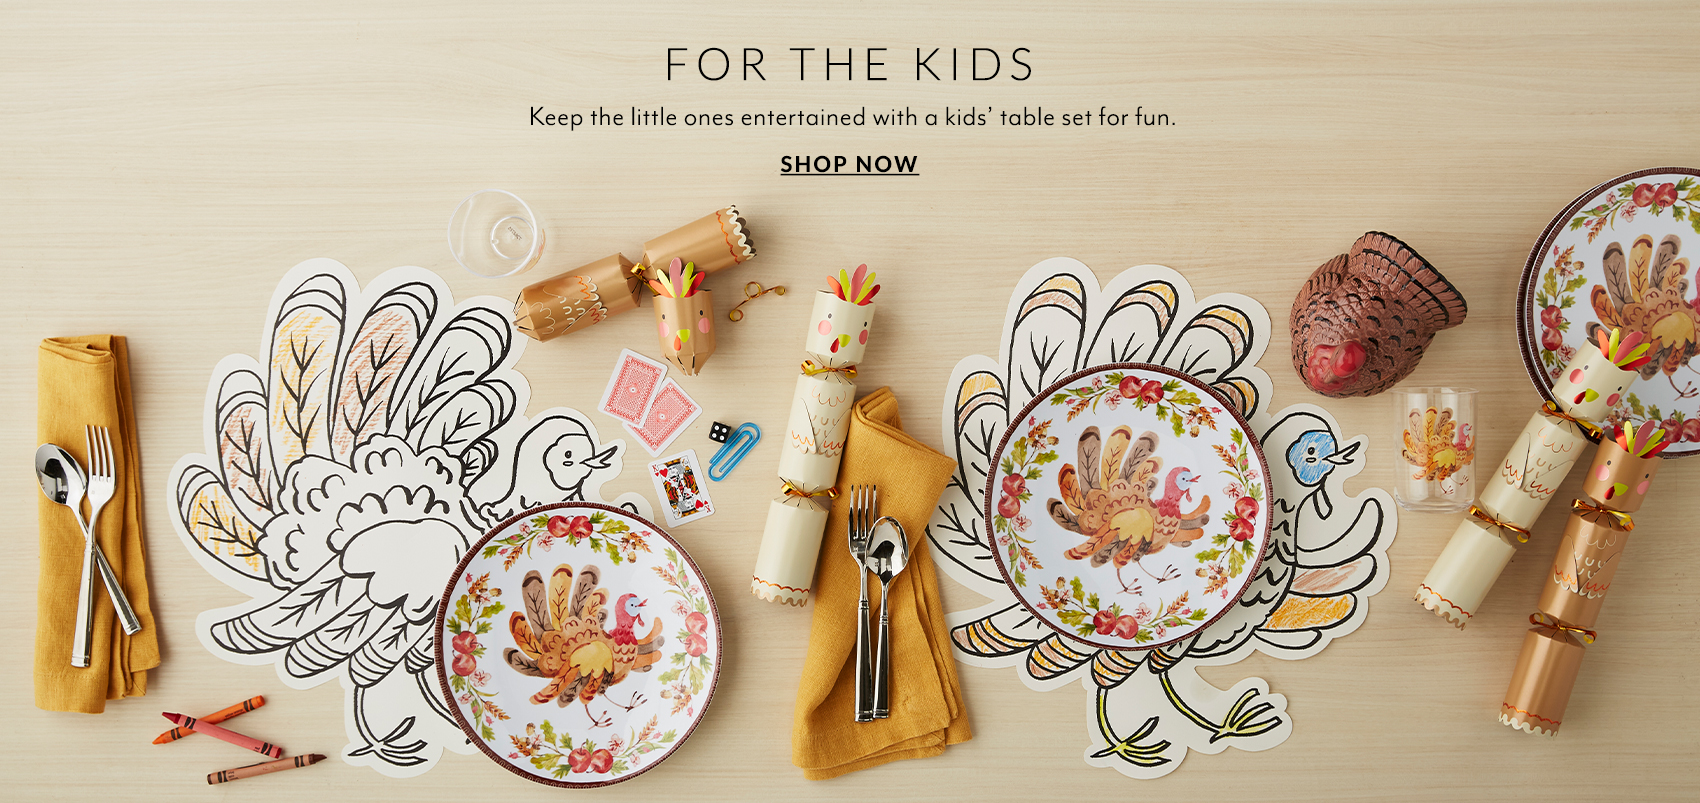 For The Kids. Keep the little ones entertained with a kids' table set for fun. Shop now.